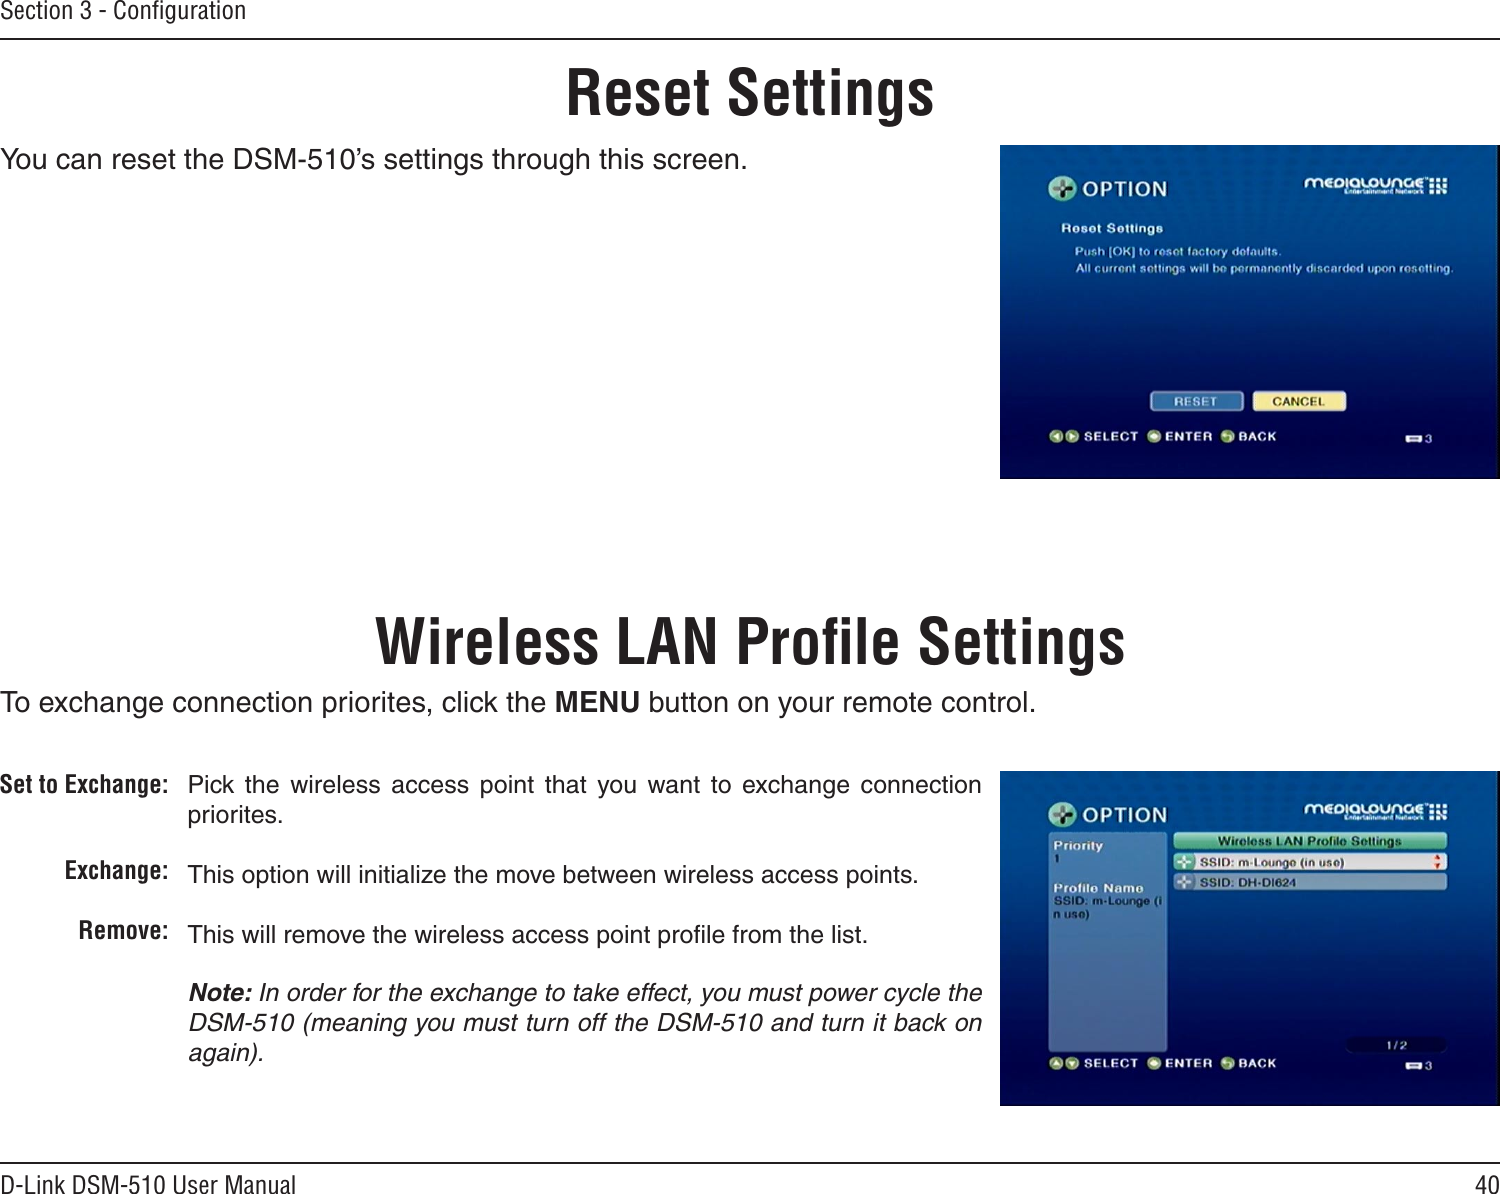 40D-Link DSM-510 User ManualSection 3 - ConﬁgurationYou can reset the DSM-510’s settings through this screen.Reset SettingsPick the  wireless  access  point  that  you  want  to  exchange  connection priorites.This option will initialize the move between wireless access points.This will remove the wireless access point proﬁle from the list.Note: In order for the exchange to take effect, you must power cycle the DSM-510 (meaning you must turn off the DSM-510 and turn it back on again). Wireless LAN Proﬁle SettingsSet to Exchange:Exchange:Remove:To exchange connection priorites, click the MENU button on your remote control.